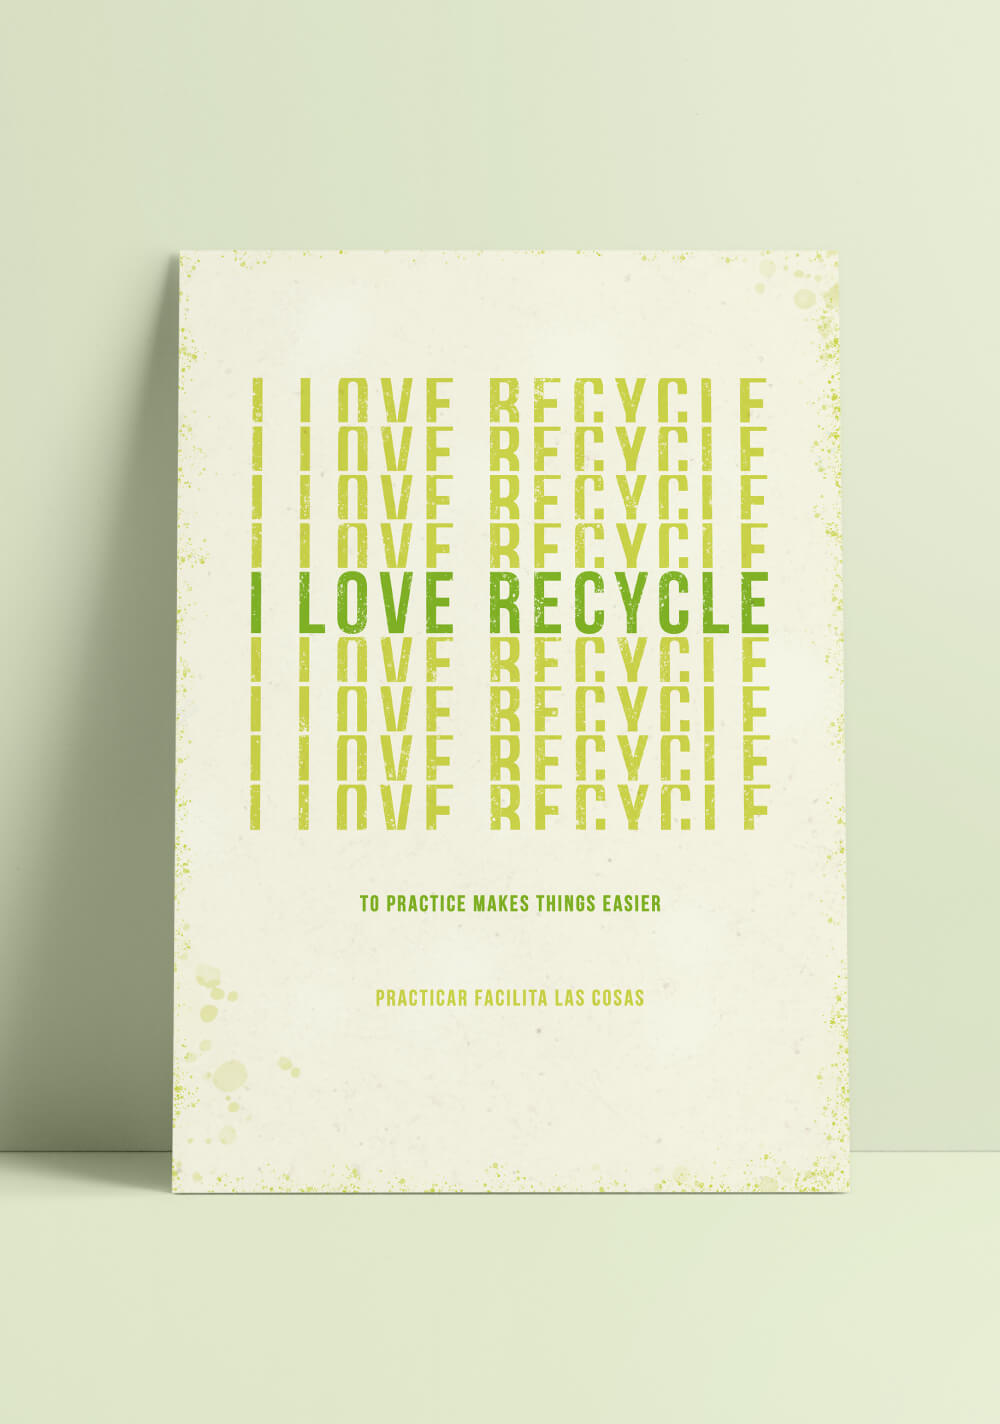 I love recycle 01